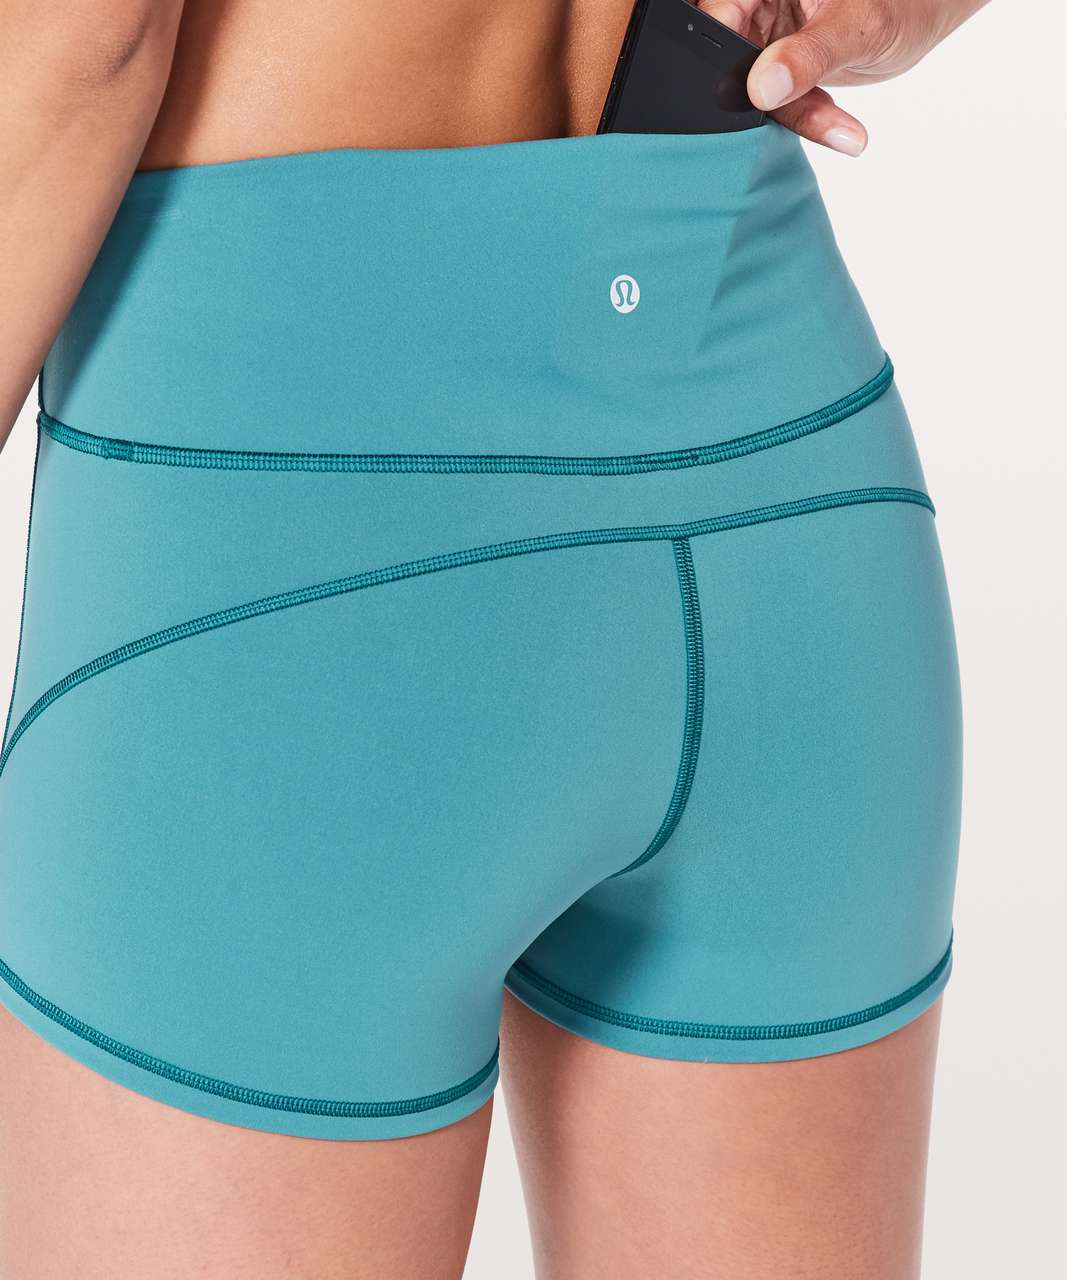 Lululemon In Movement Short *Everlux 2.5" - Pacific Teal